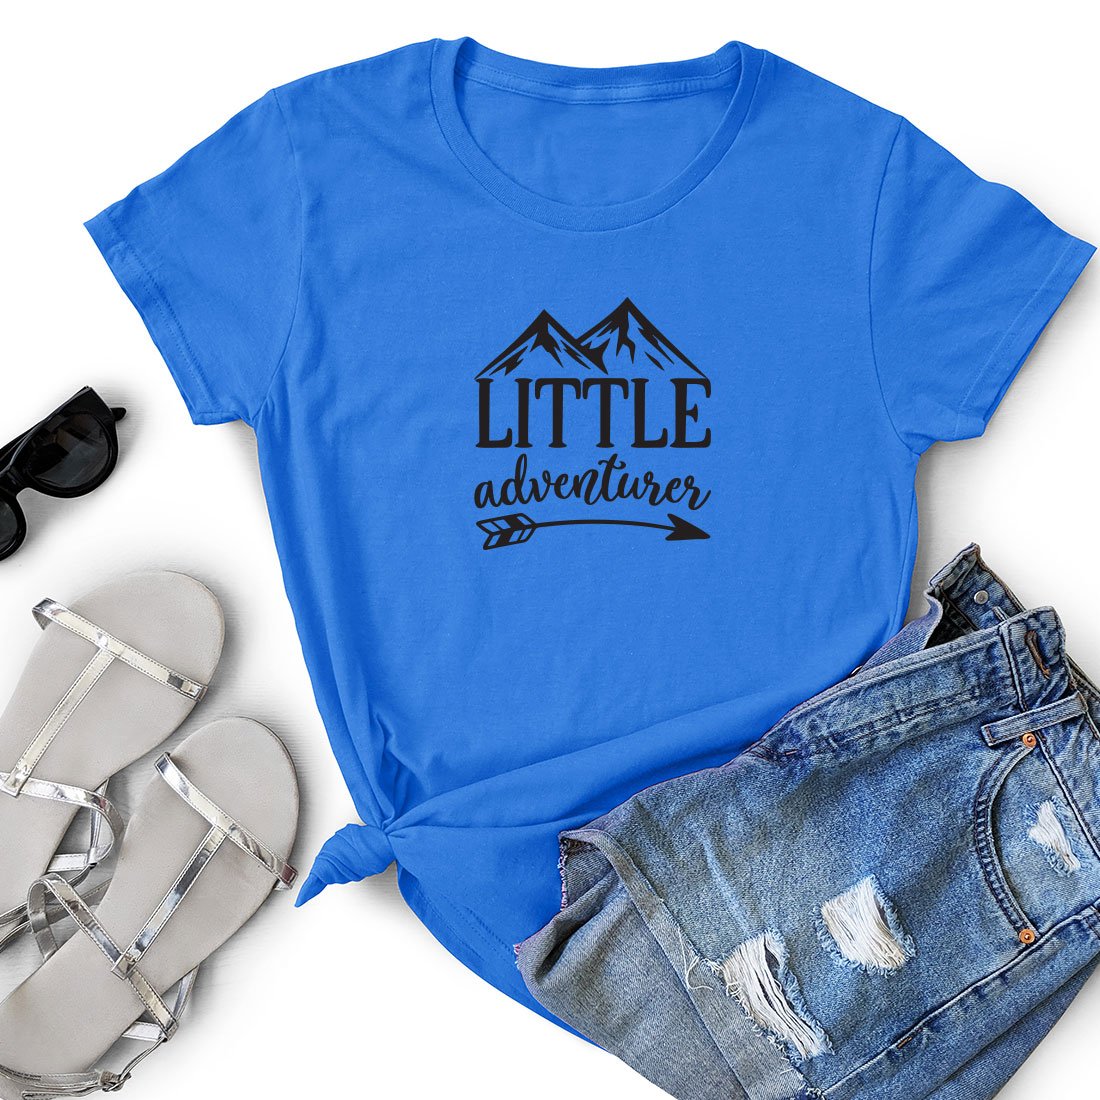 Blue shirt that says little adventurer next to a pair of shorts.